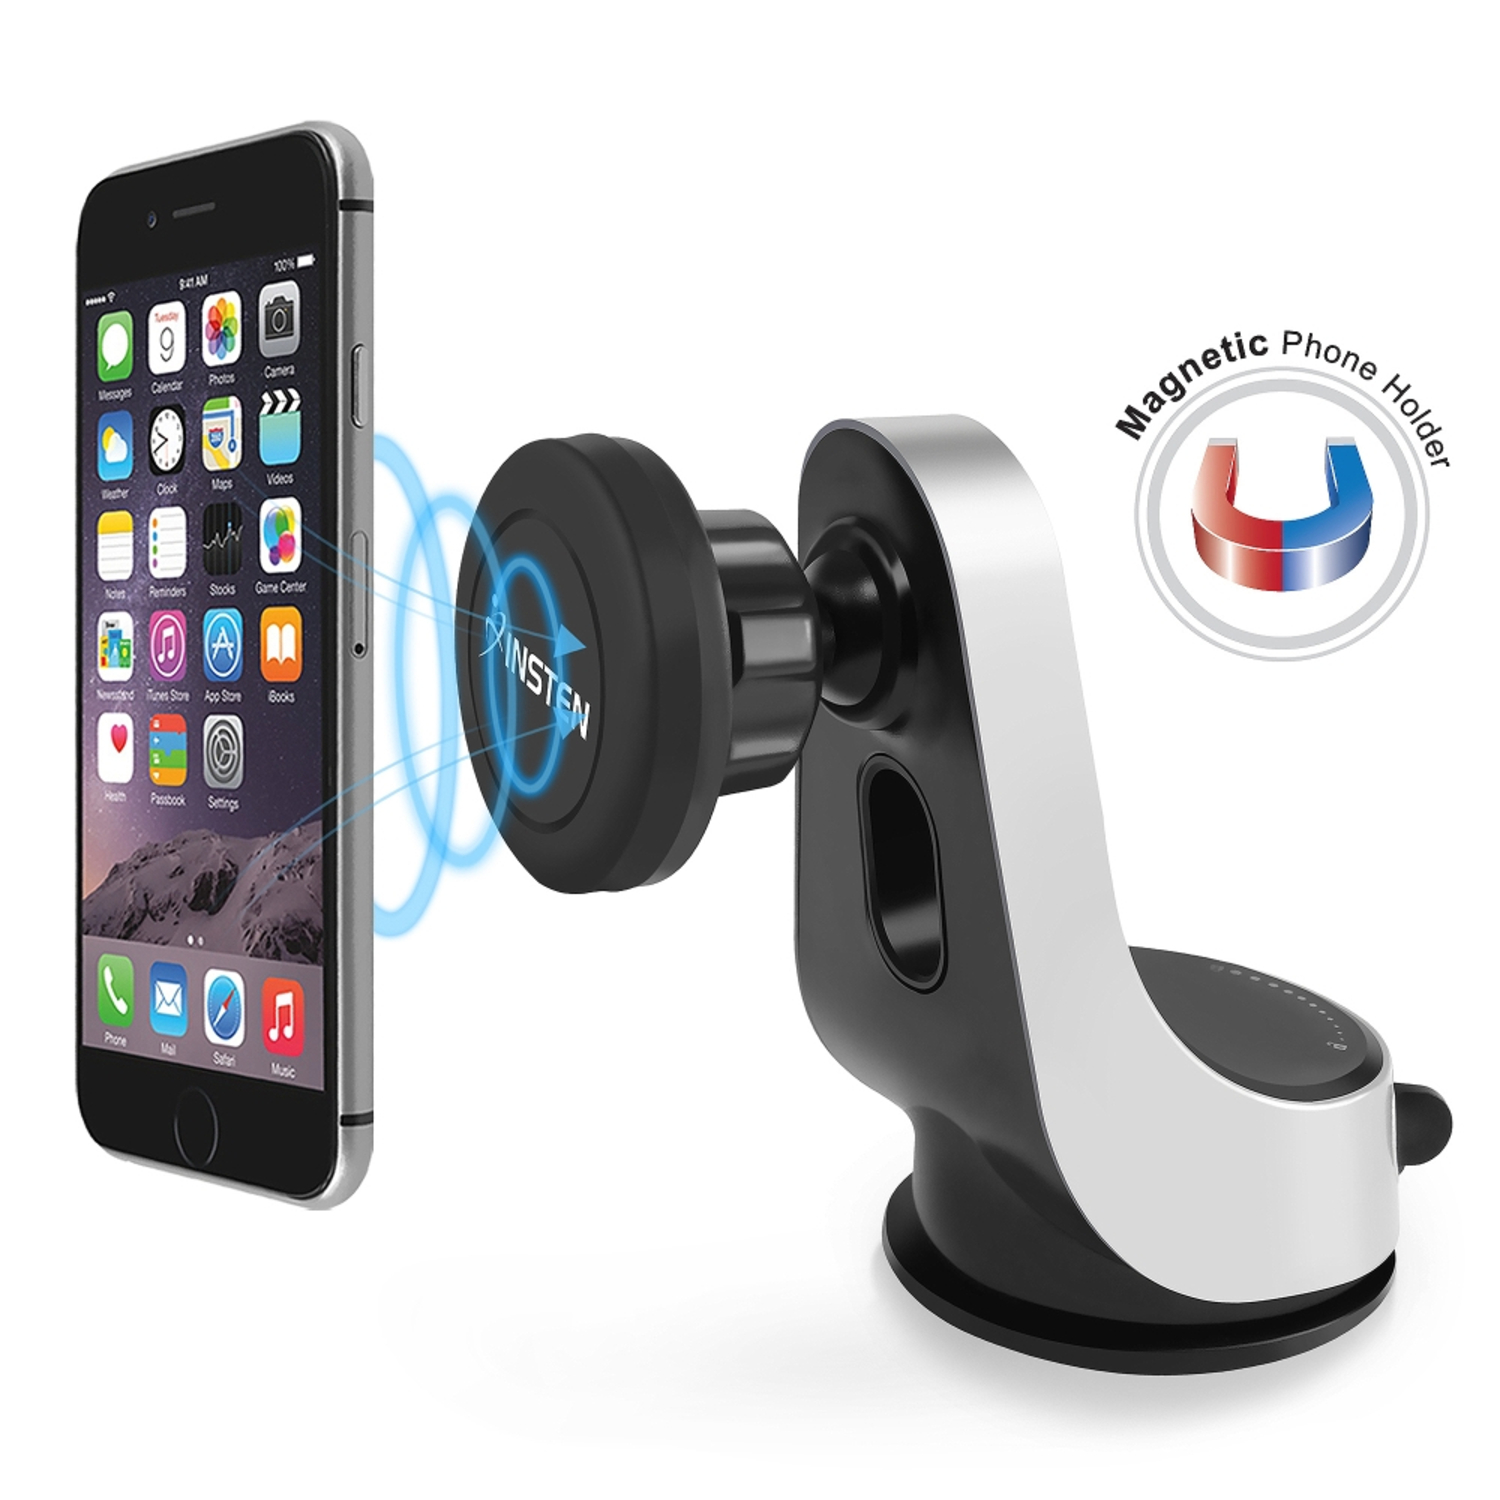 Insten Universal Magnetic Windshield Dashboard Car Mount Phone Holder For Smartphones & Mini Tablets Up to 7 Inches, Black\/Silver